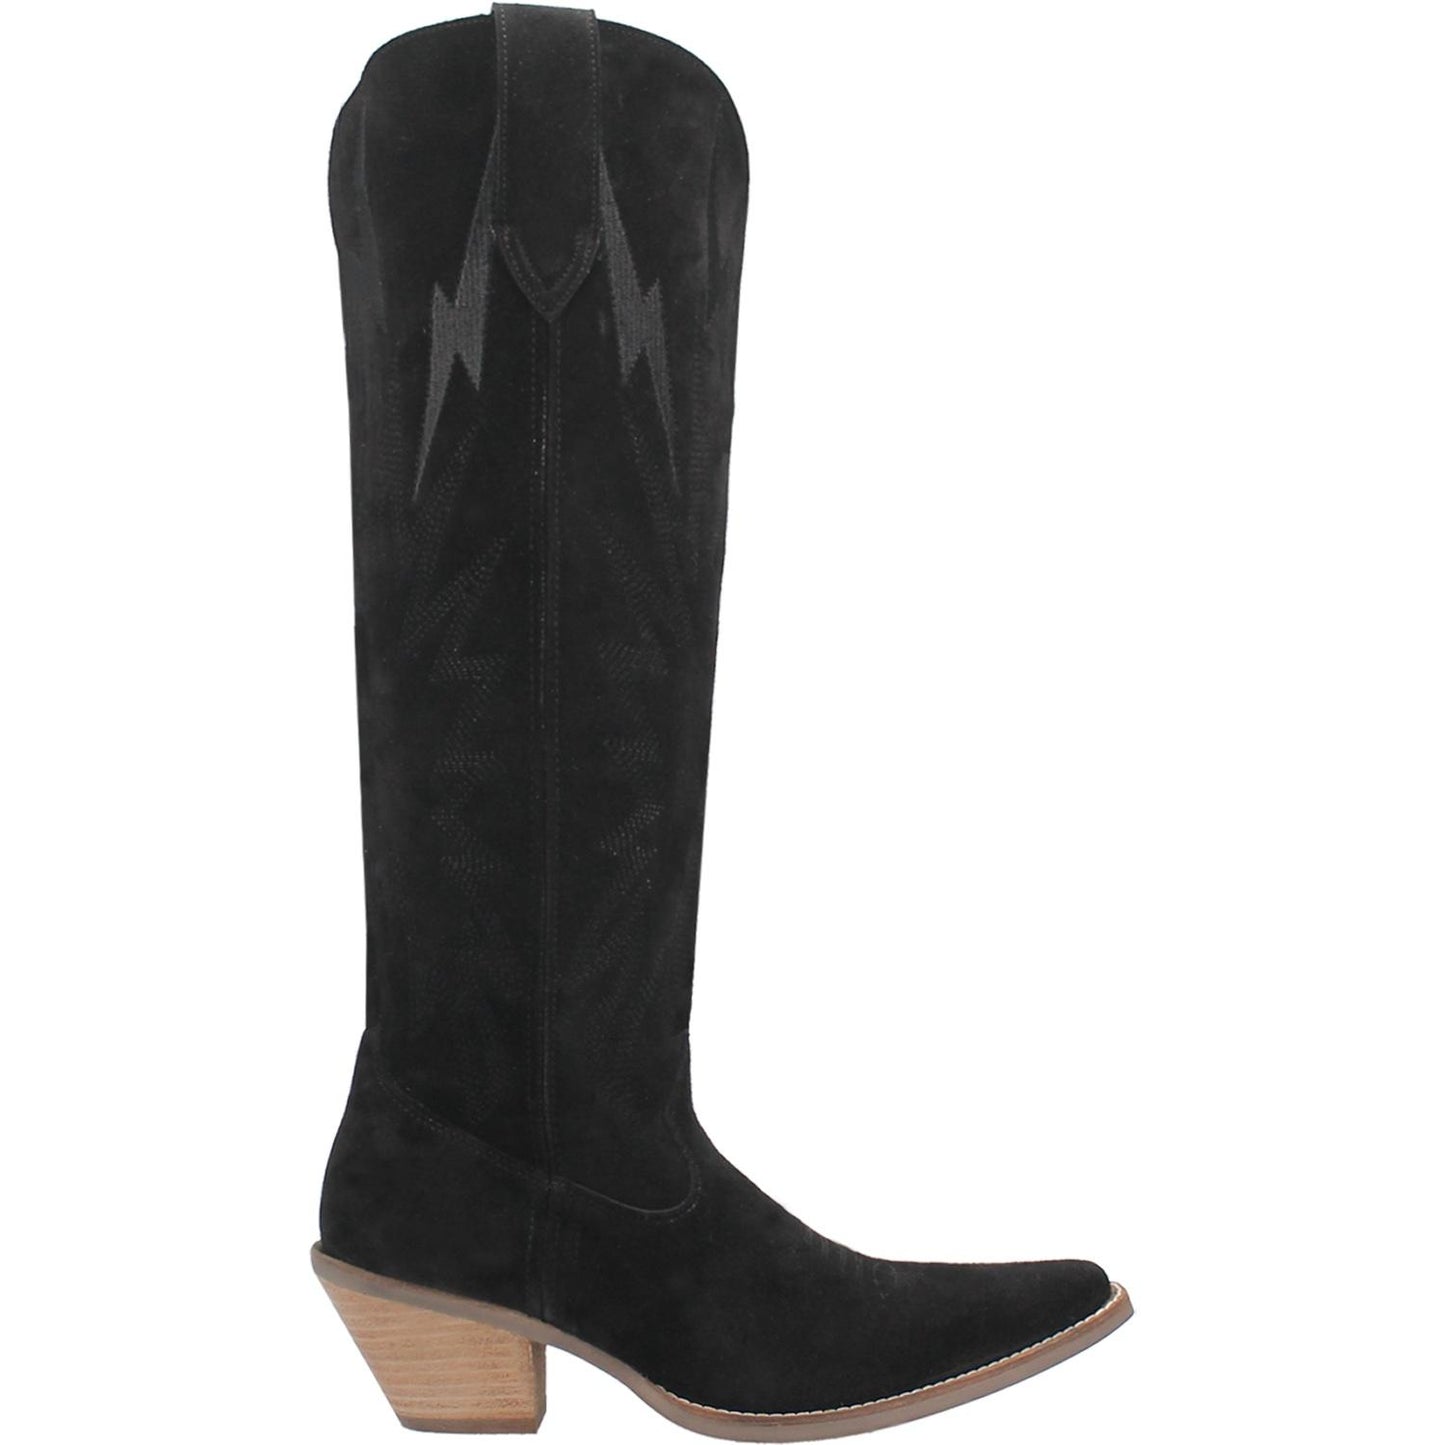 DI597 Women's Thunder Road 16 inch Leather Boot by Dingo